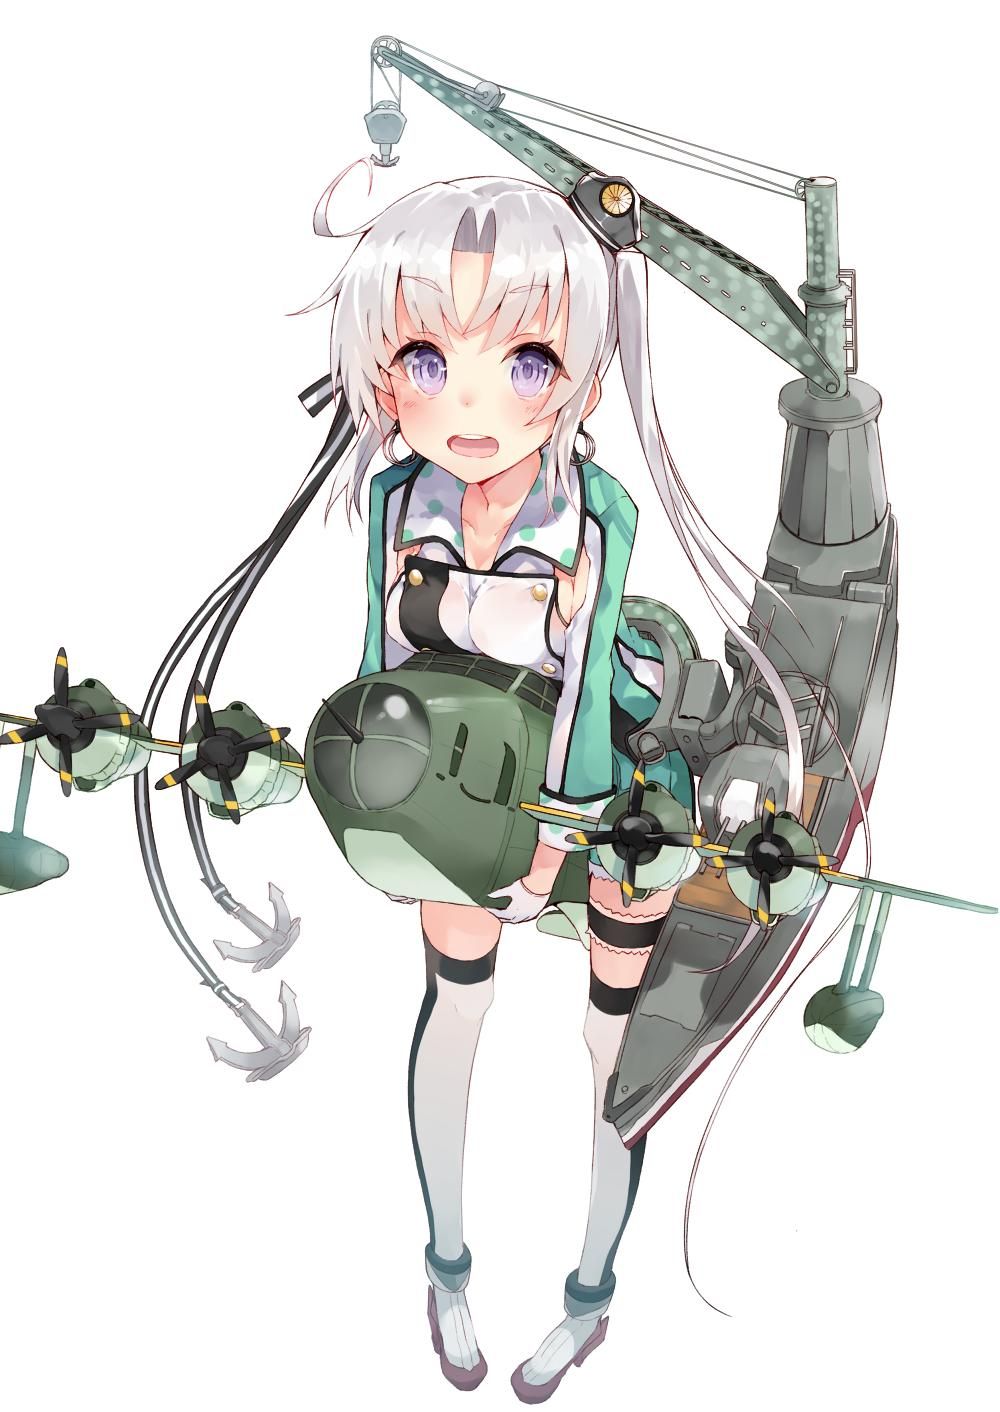 I want to have one shot in the image of Kantai 3